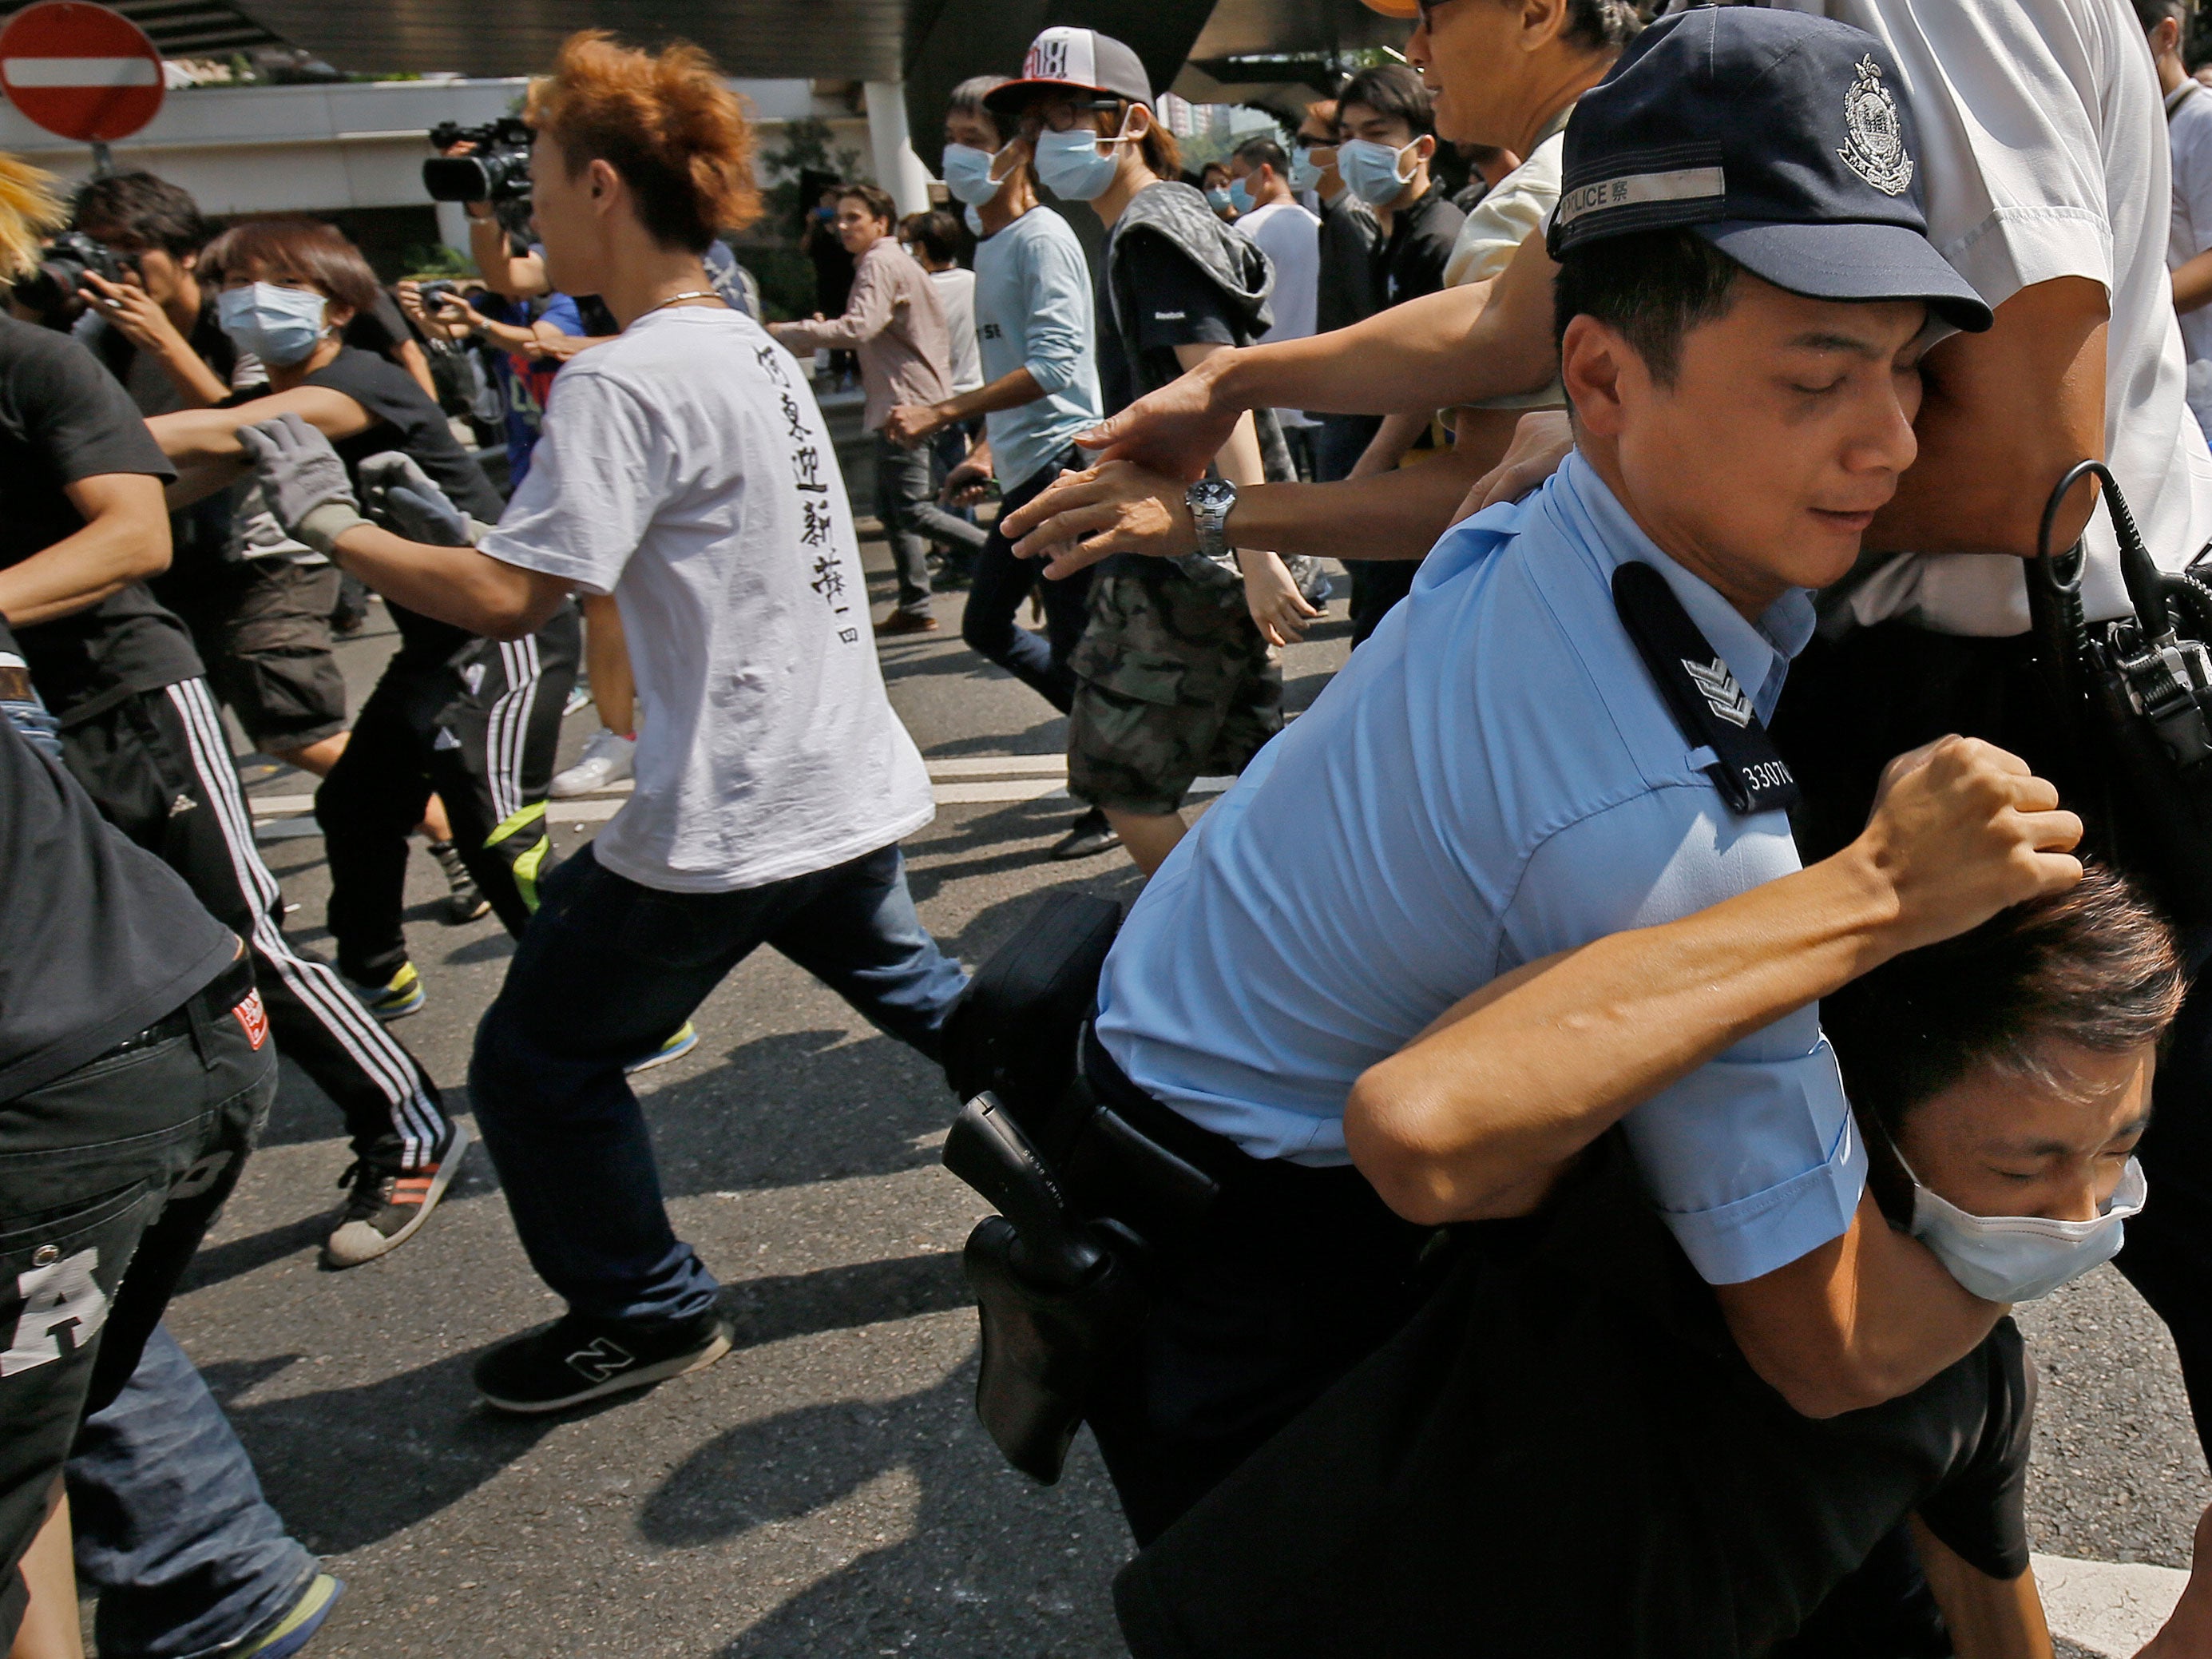 Police have been holding back angry crowds attempting to pull down protesters' barricades